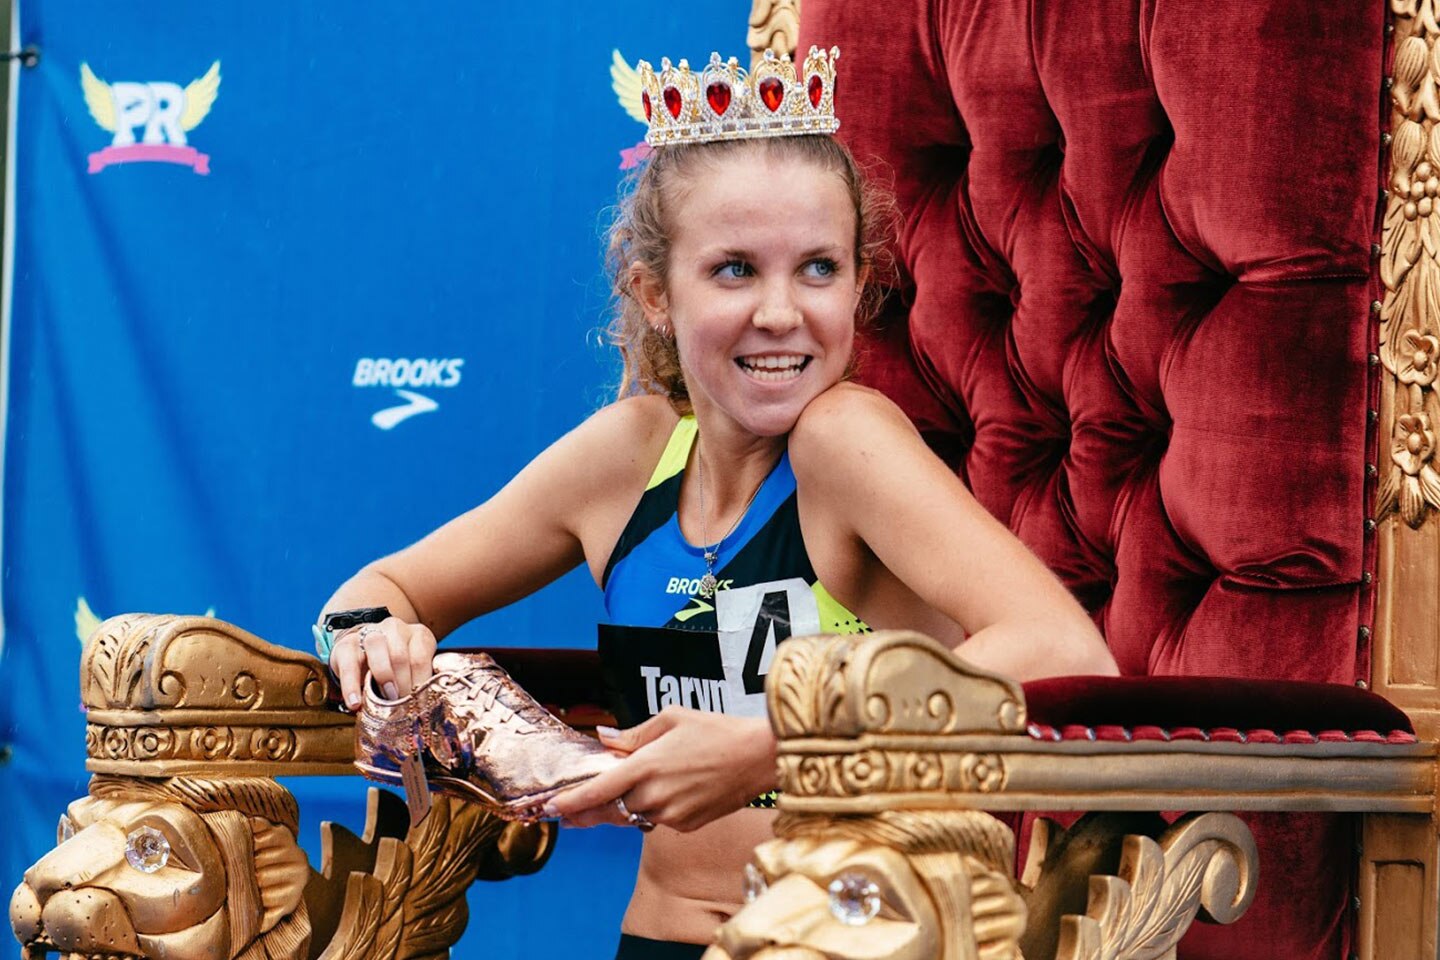 An athlete sits on a throne with a crown and holding a golden shoe